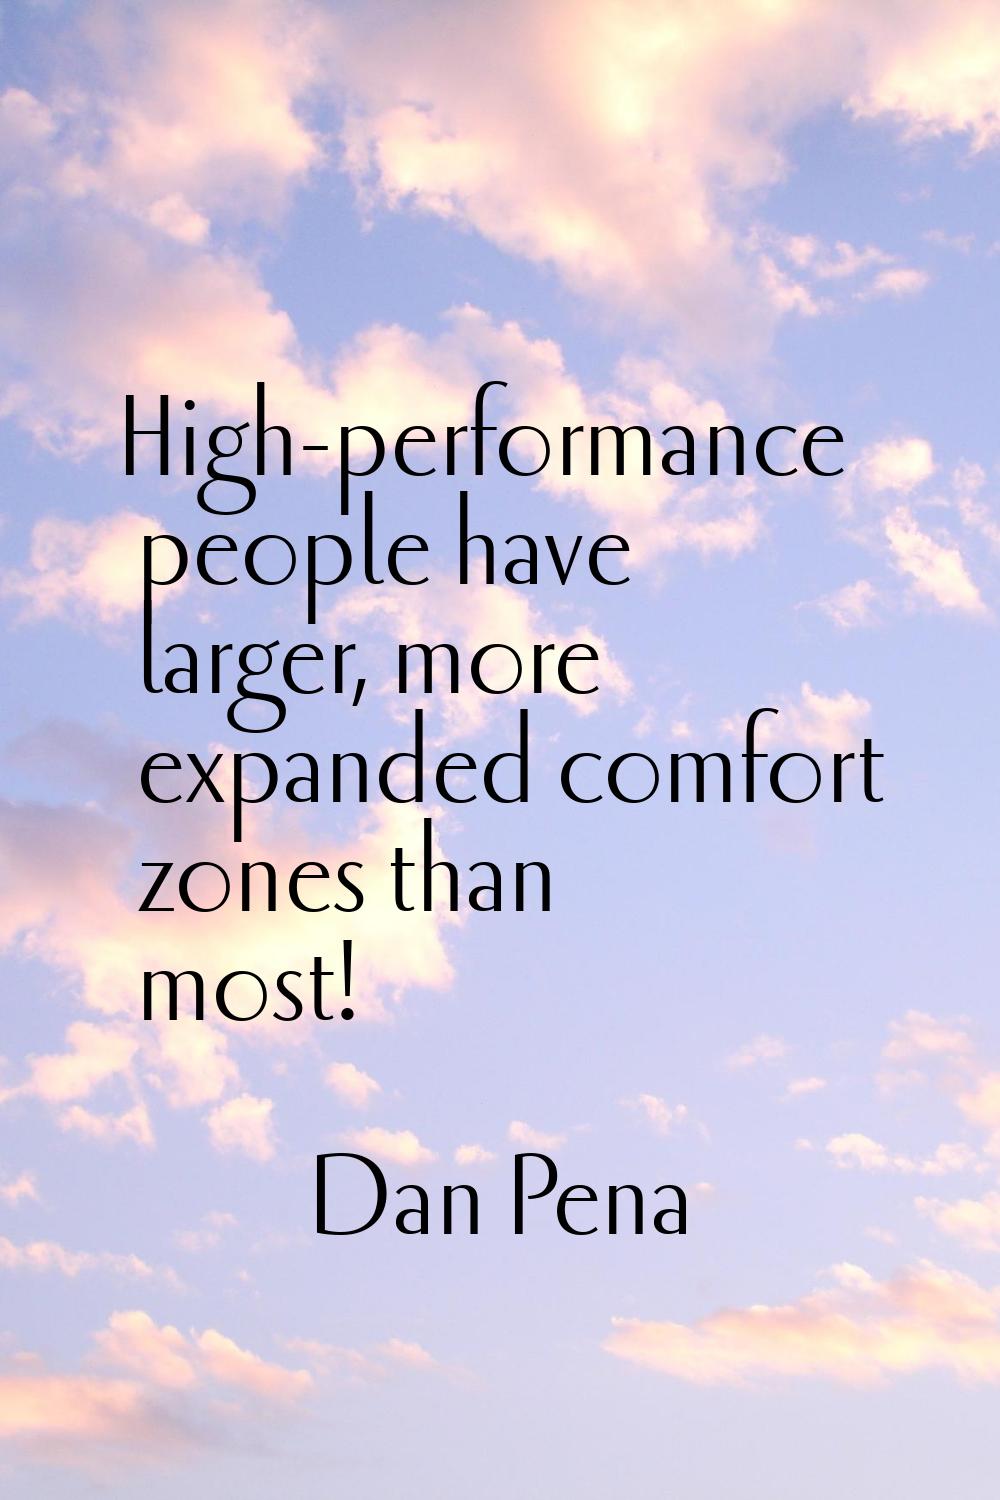 High-performance people have larger, more expanded comfort zones than most!